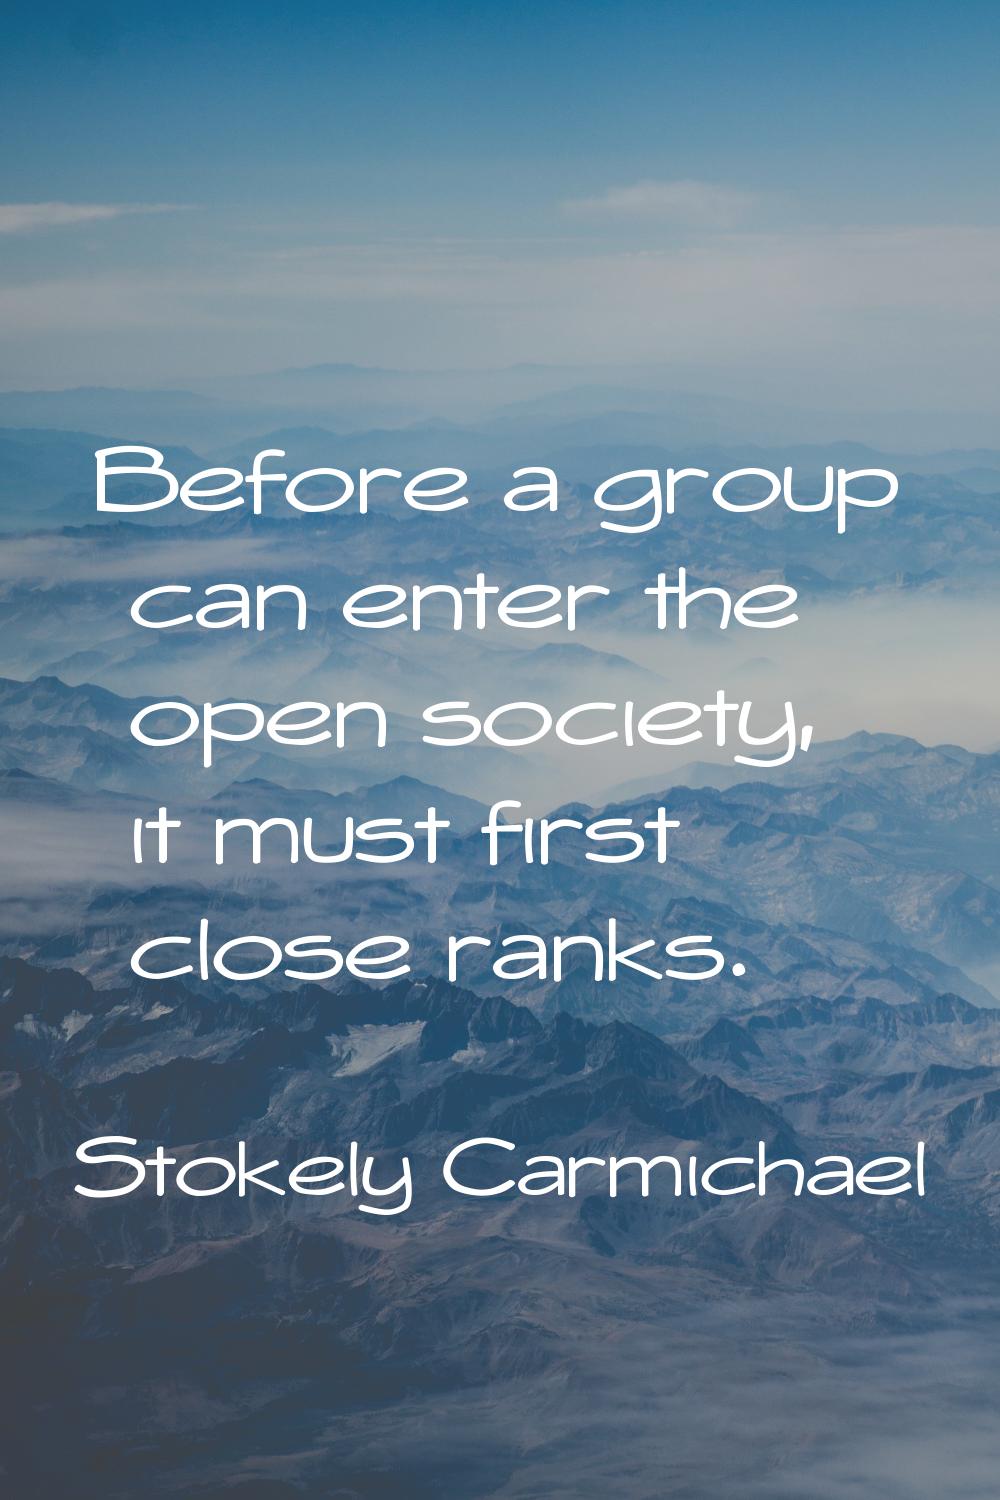 Before a group can enter the open society, it must first close ranks.